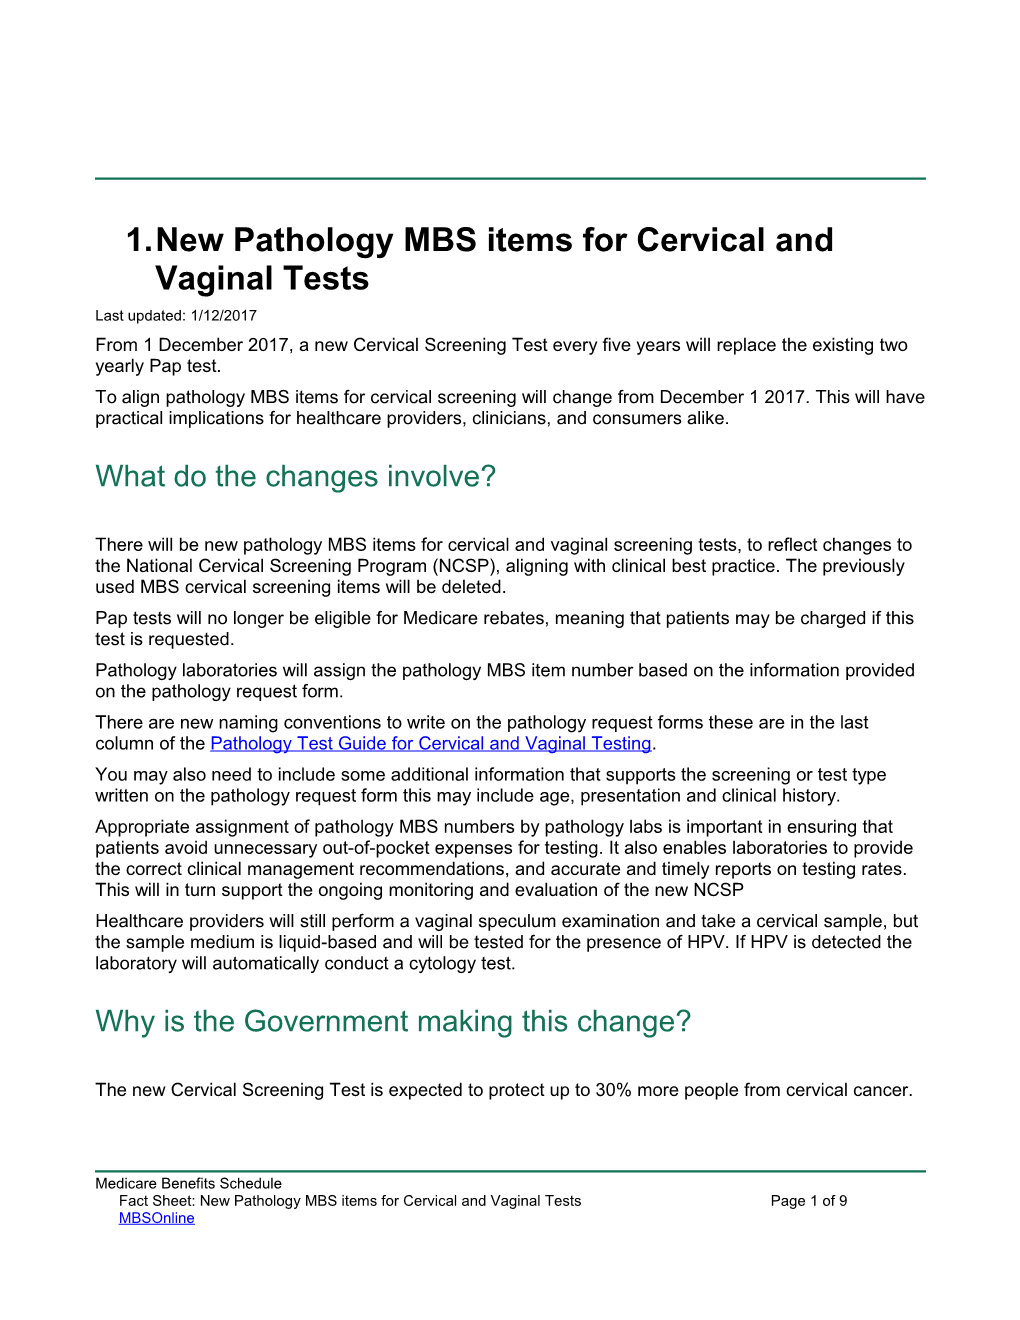 New Pathology MBS Items for Cervical and Vaginal Tests